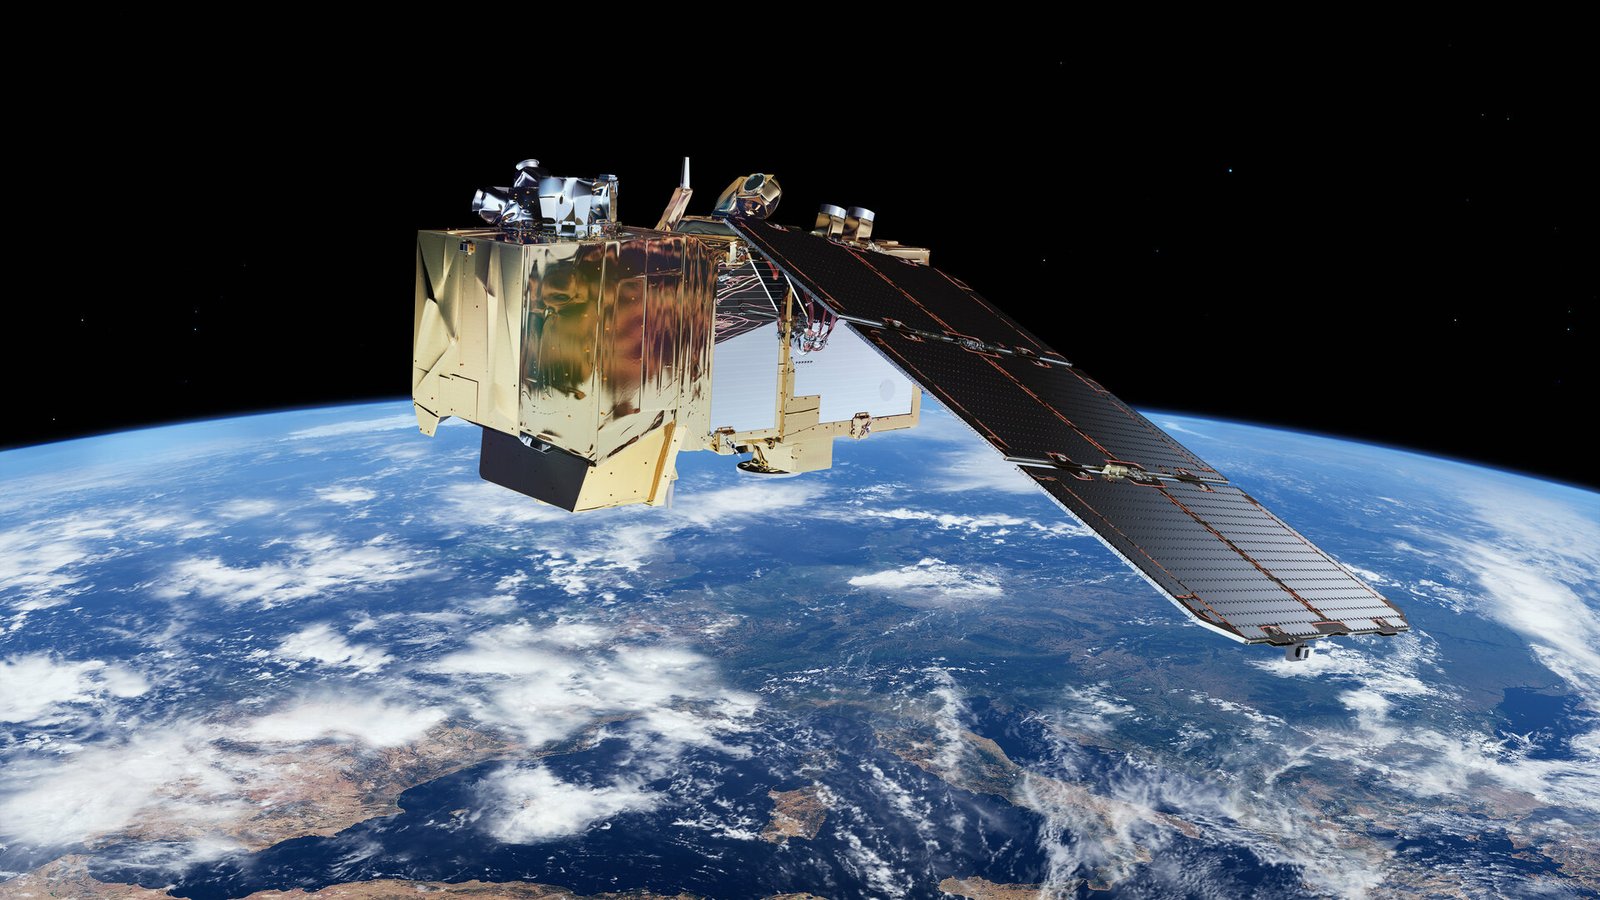 Preparations and launch of Sentinel 2 satellites – video